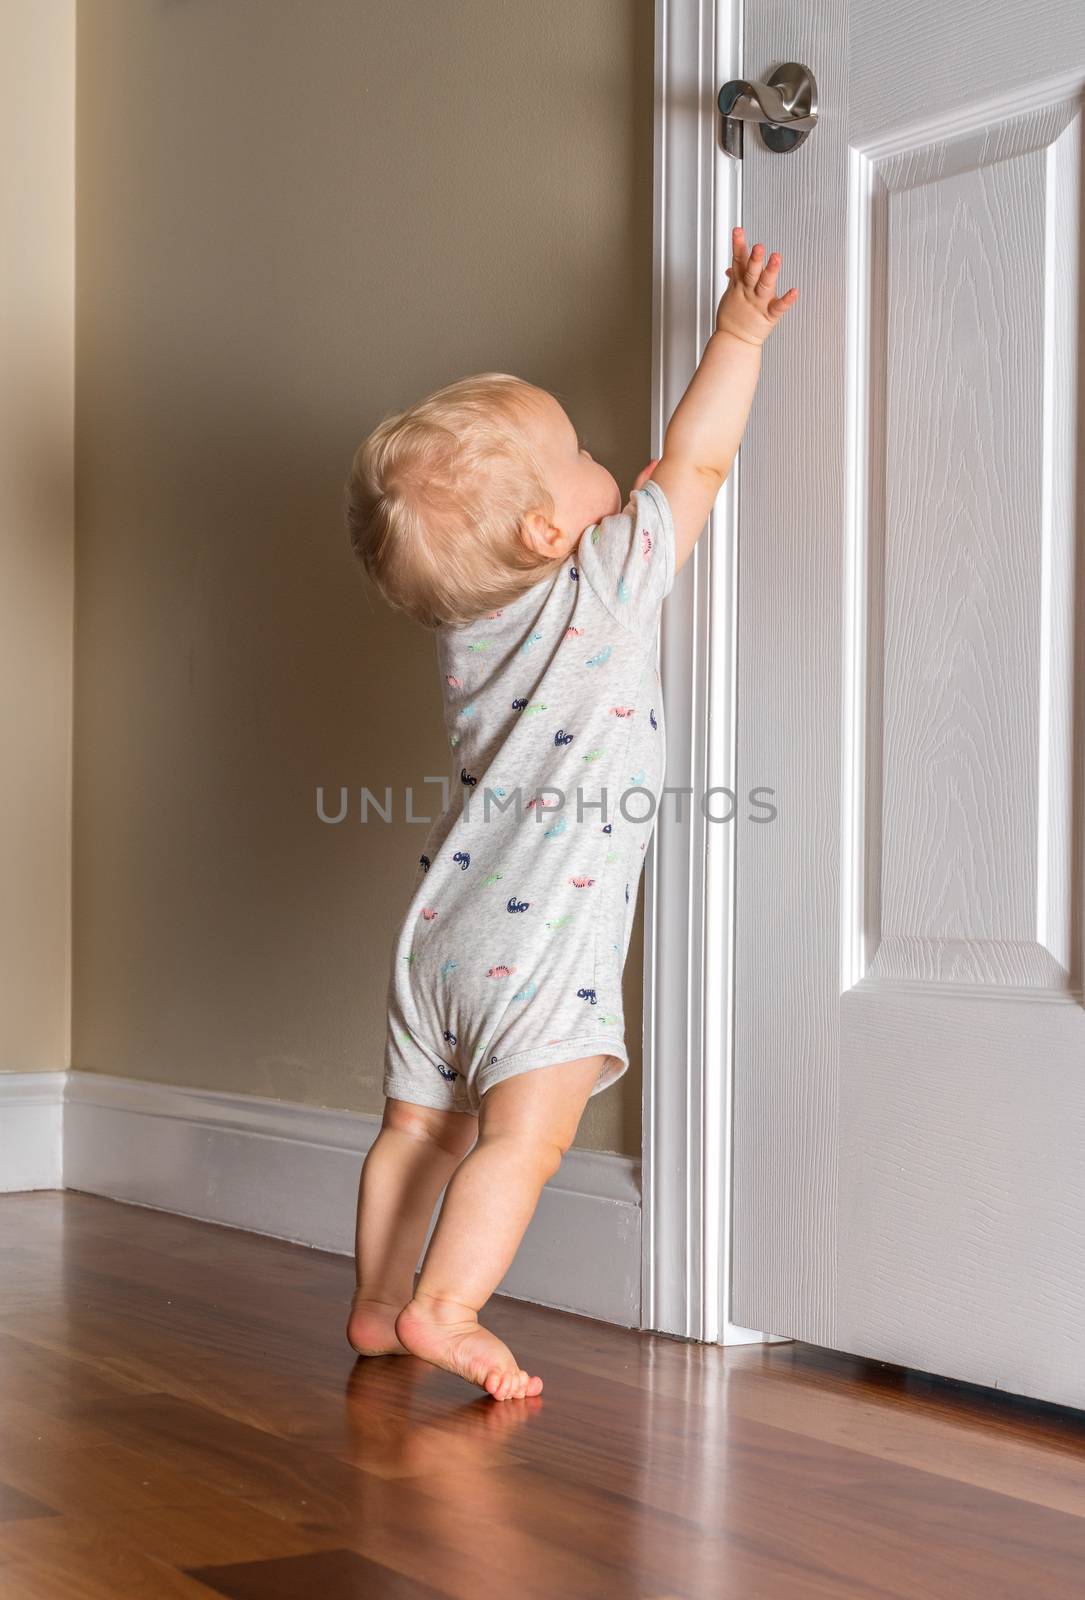 Young baby just able to walk reaching up for the door handle on wooden floor by steheap